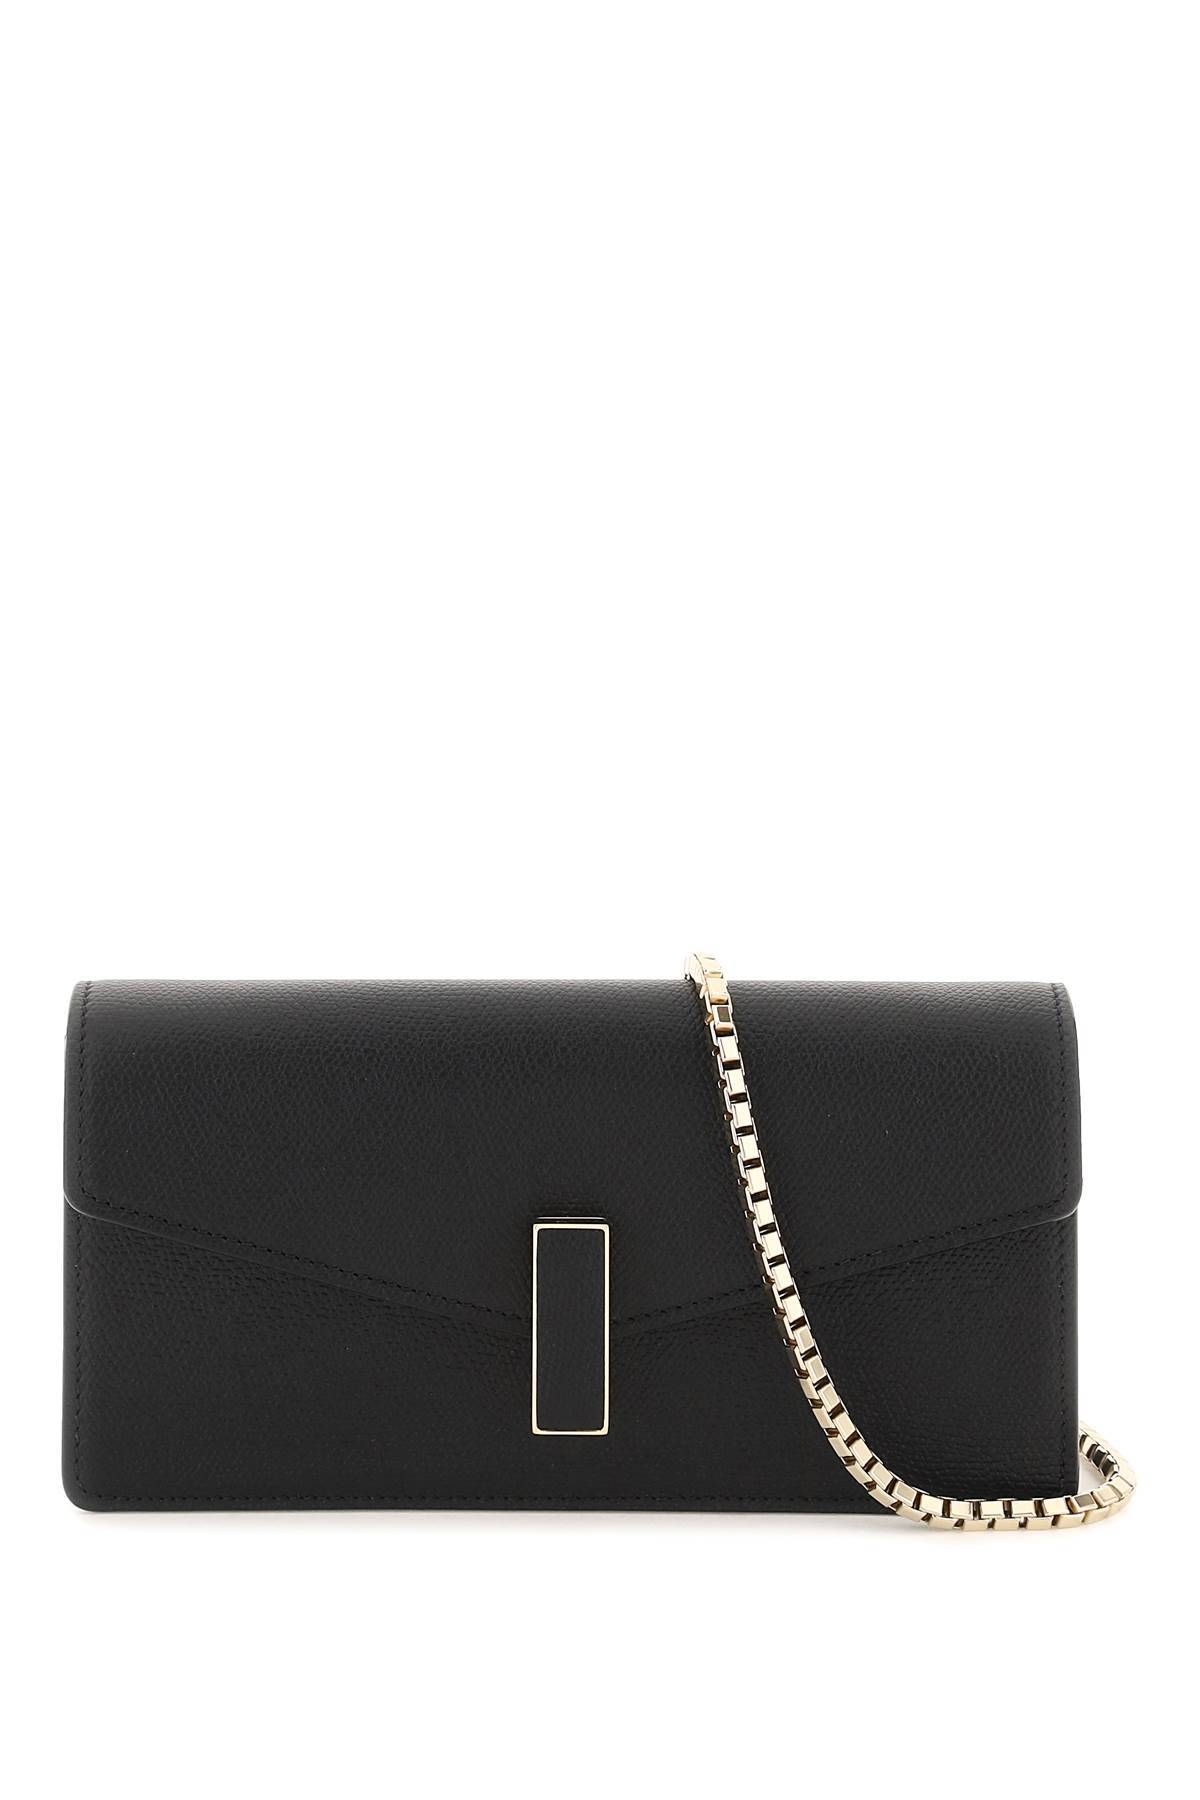 Valextra 'iside' Clutch In Black